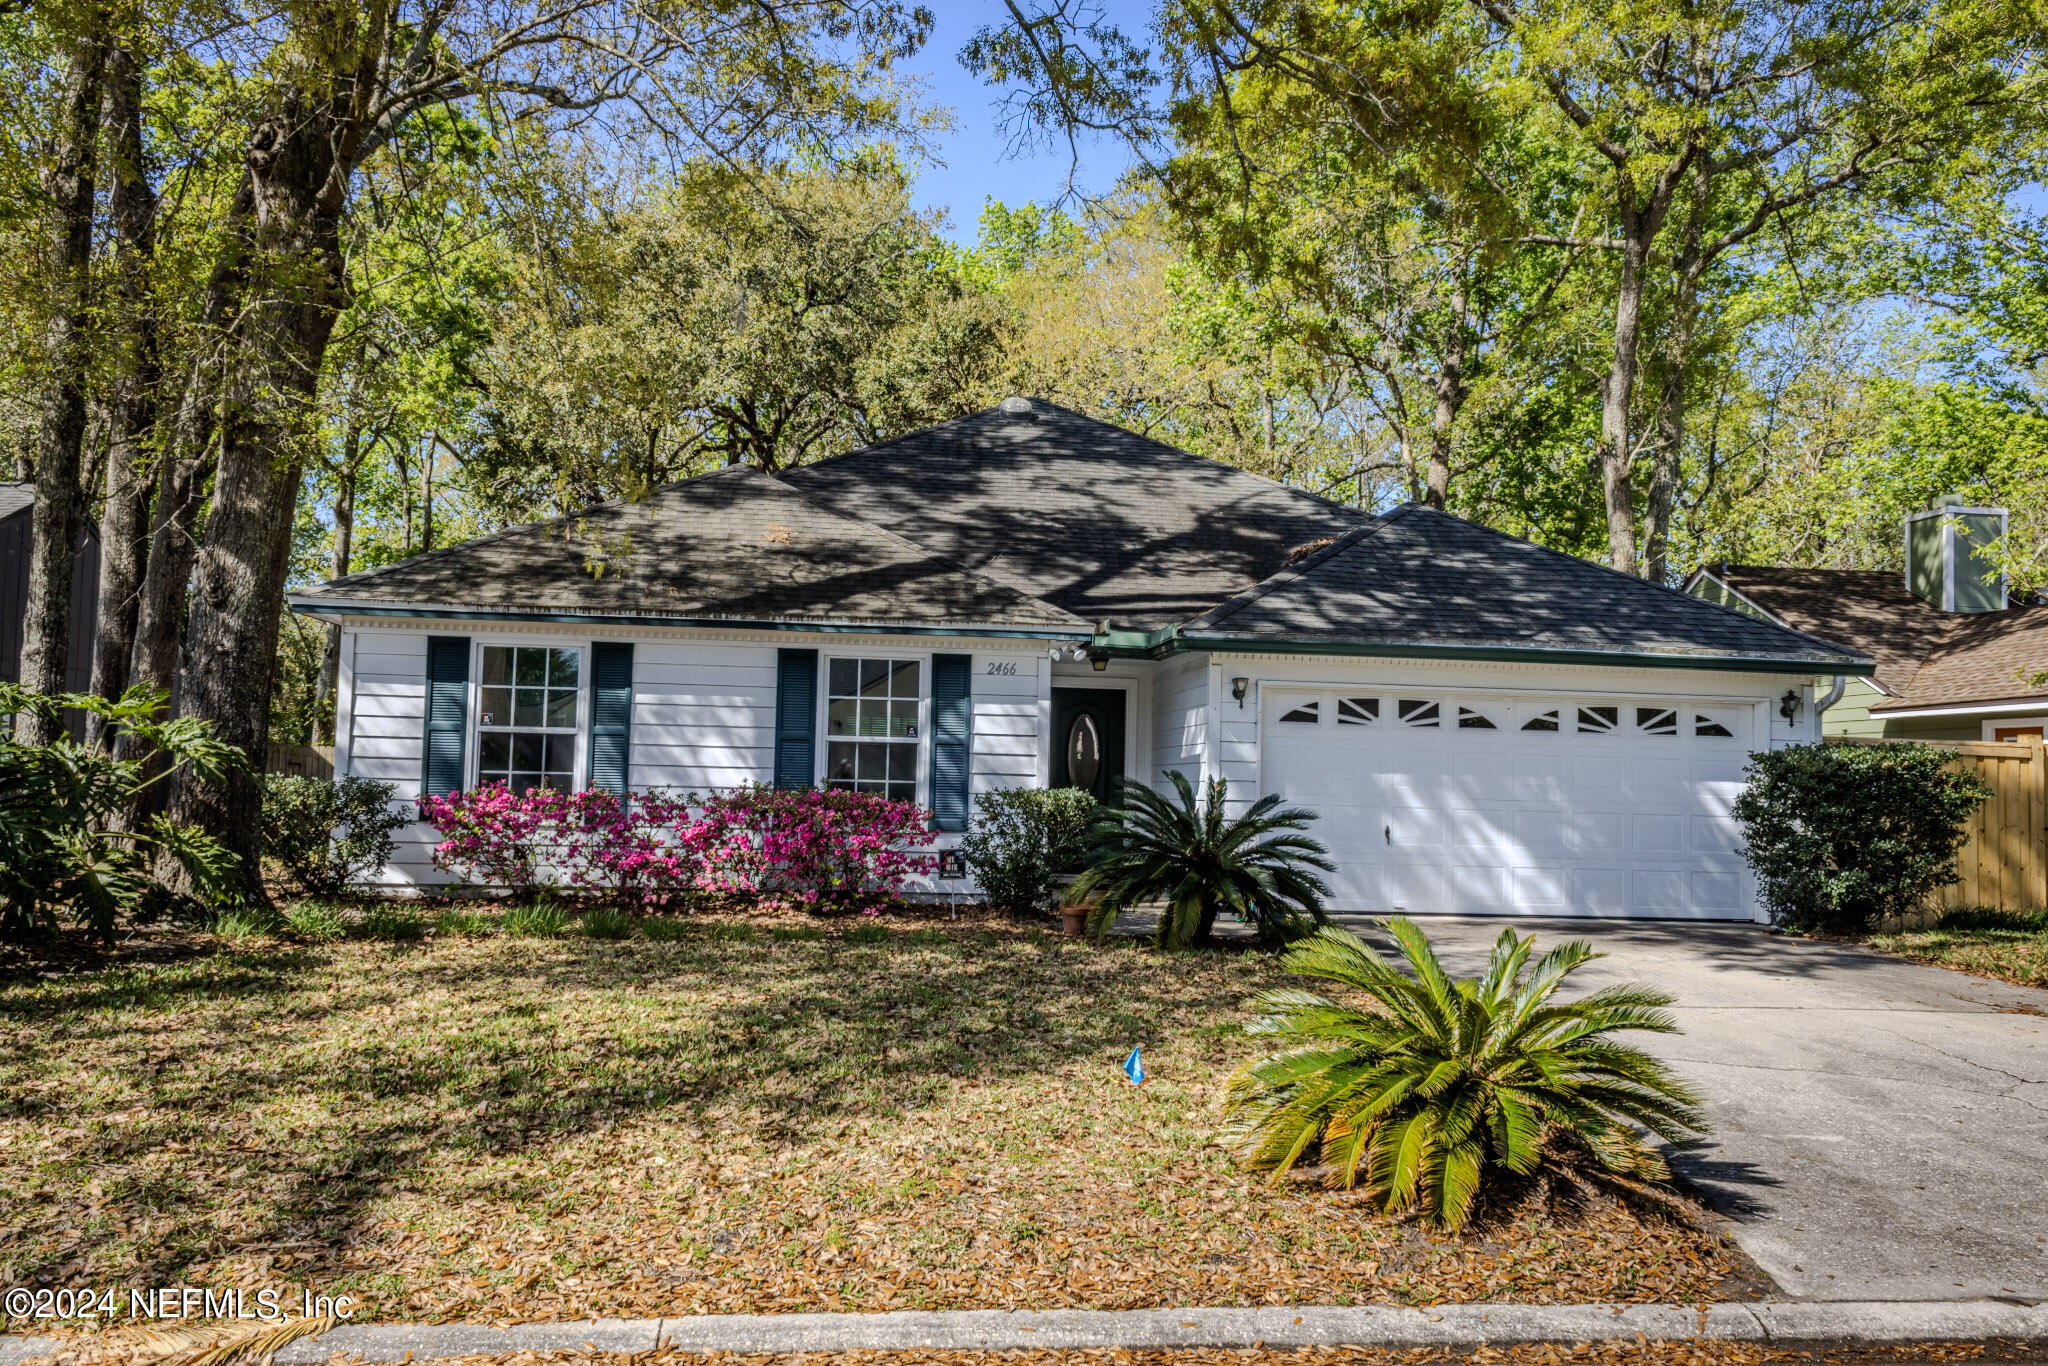 Jacksonville, FL home for sale located at 2466 BLUFFTON Drive, Jacksonville, FL 32224